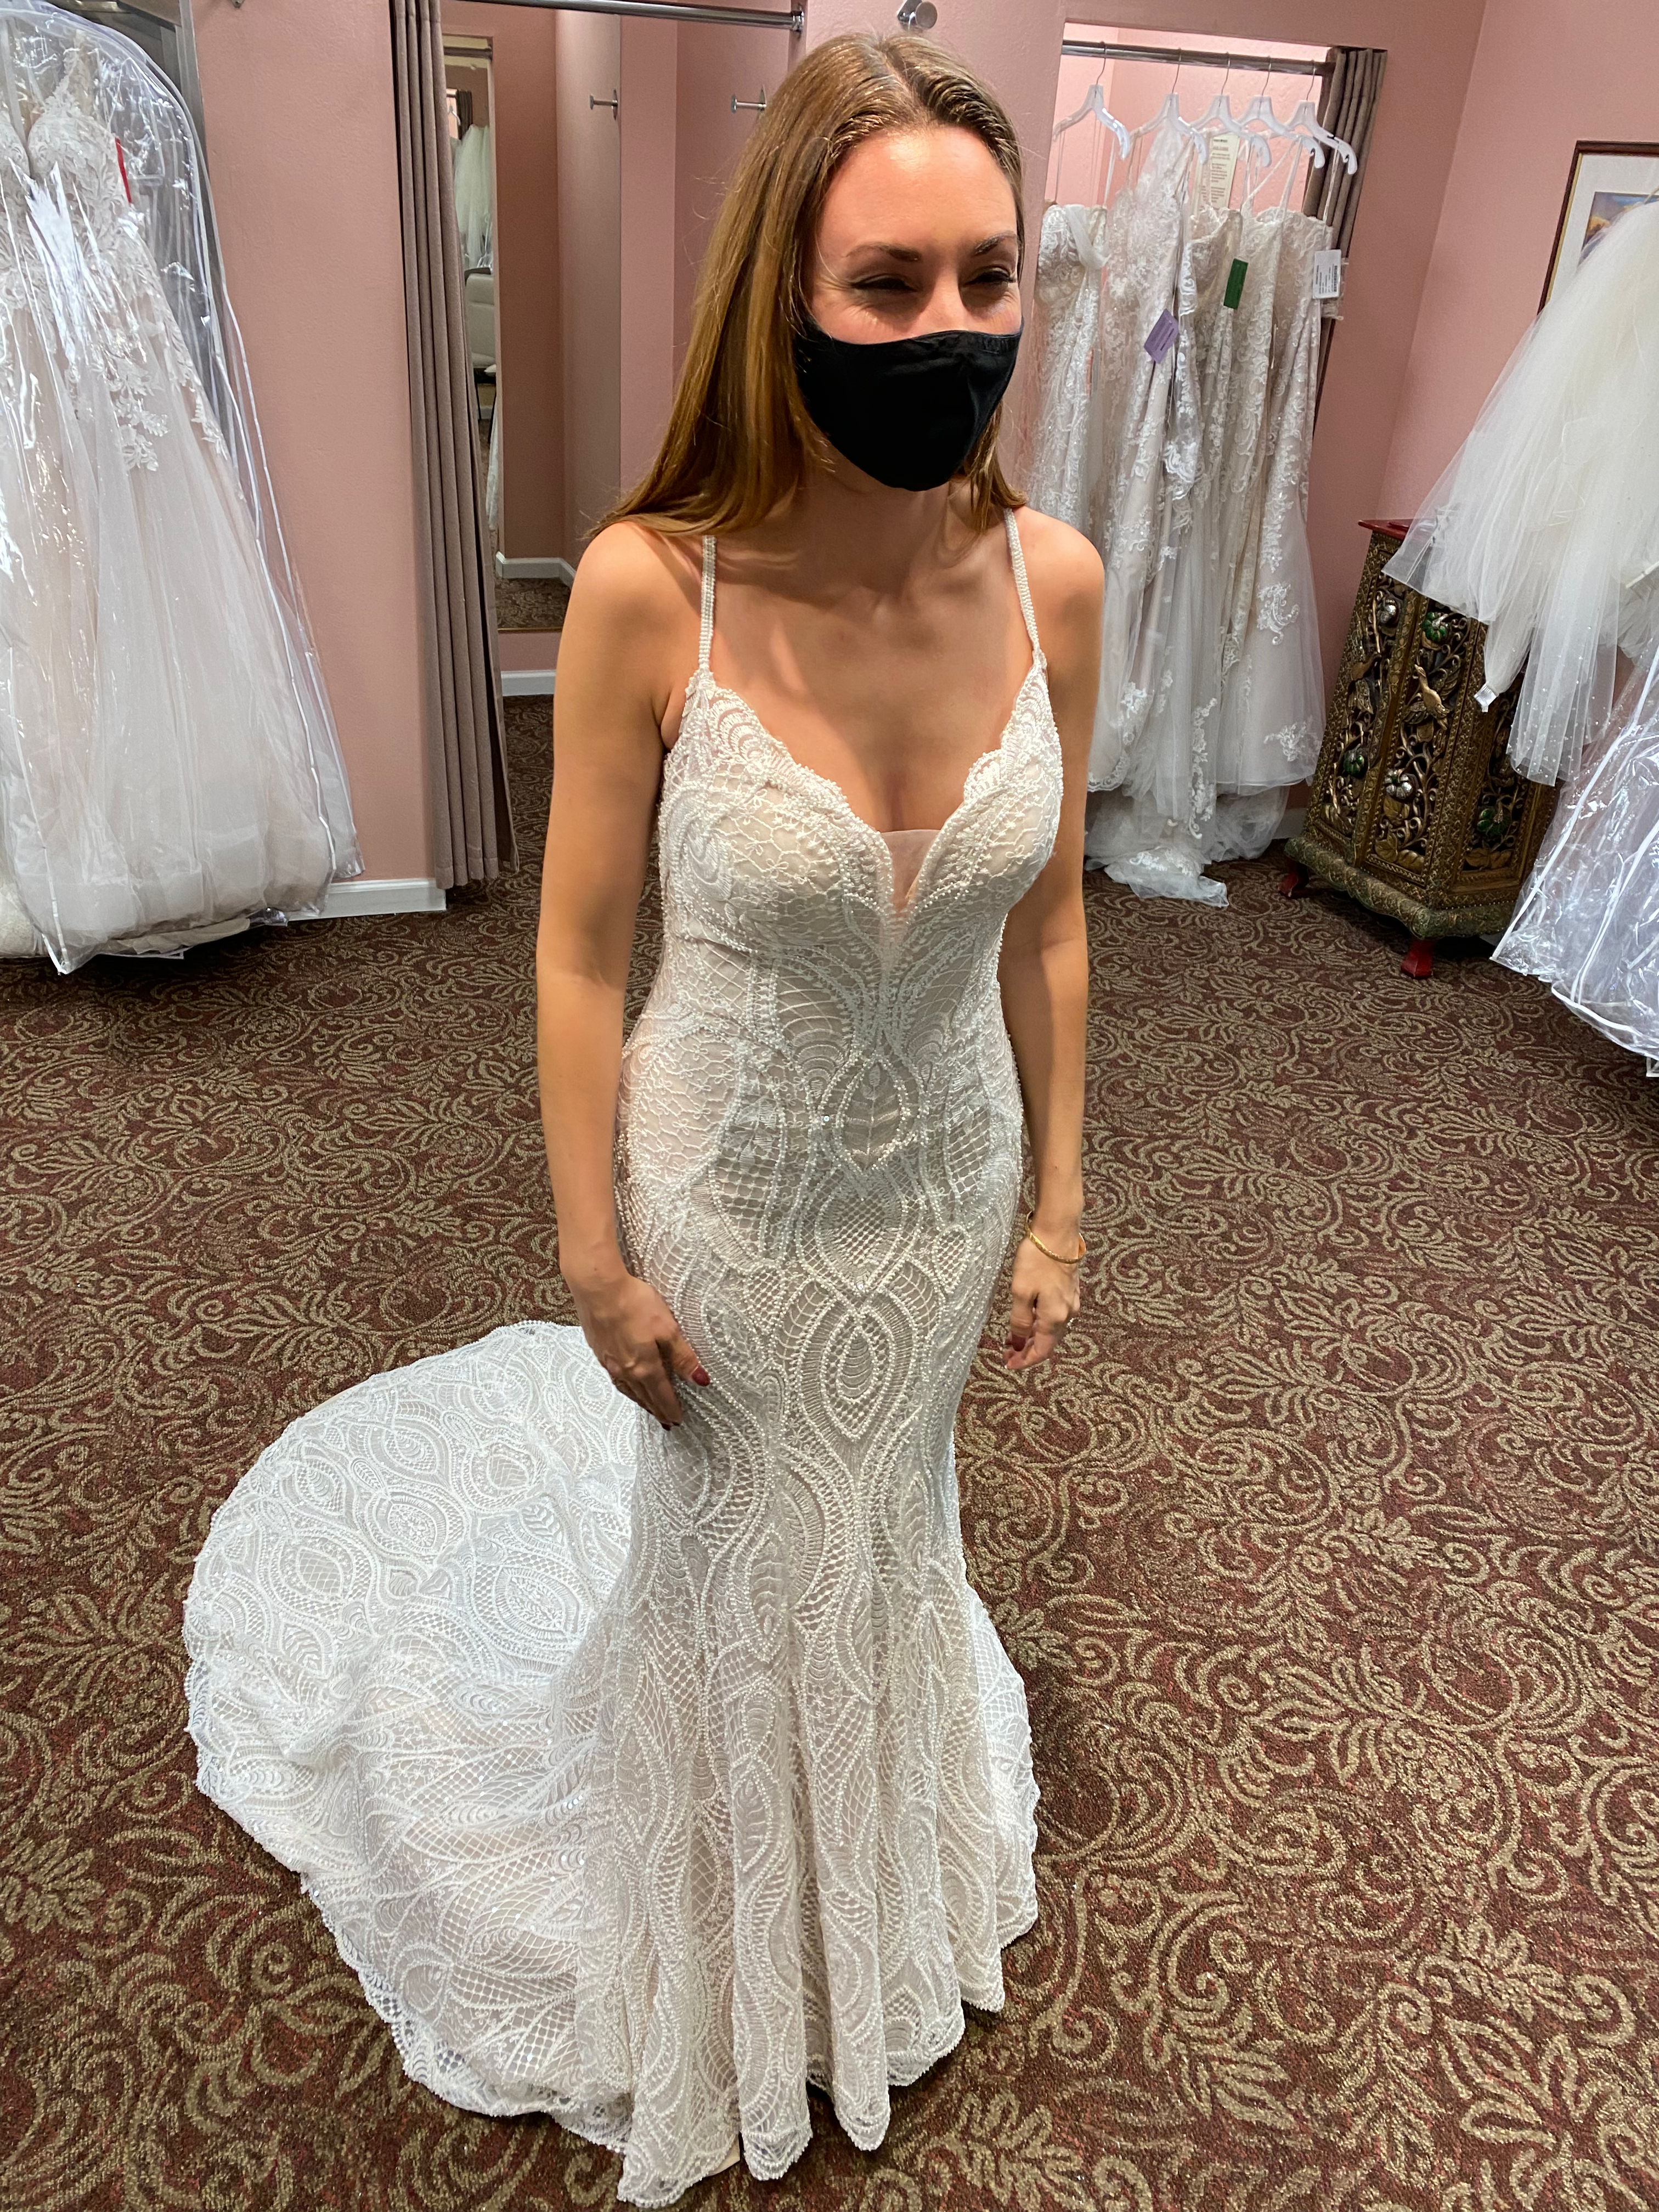 Tara in her wedding dress in a bridal boutique with a mask on looking in a mirror.